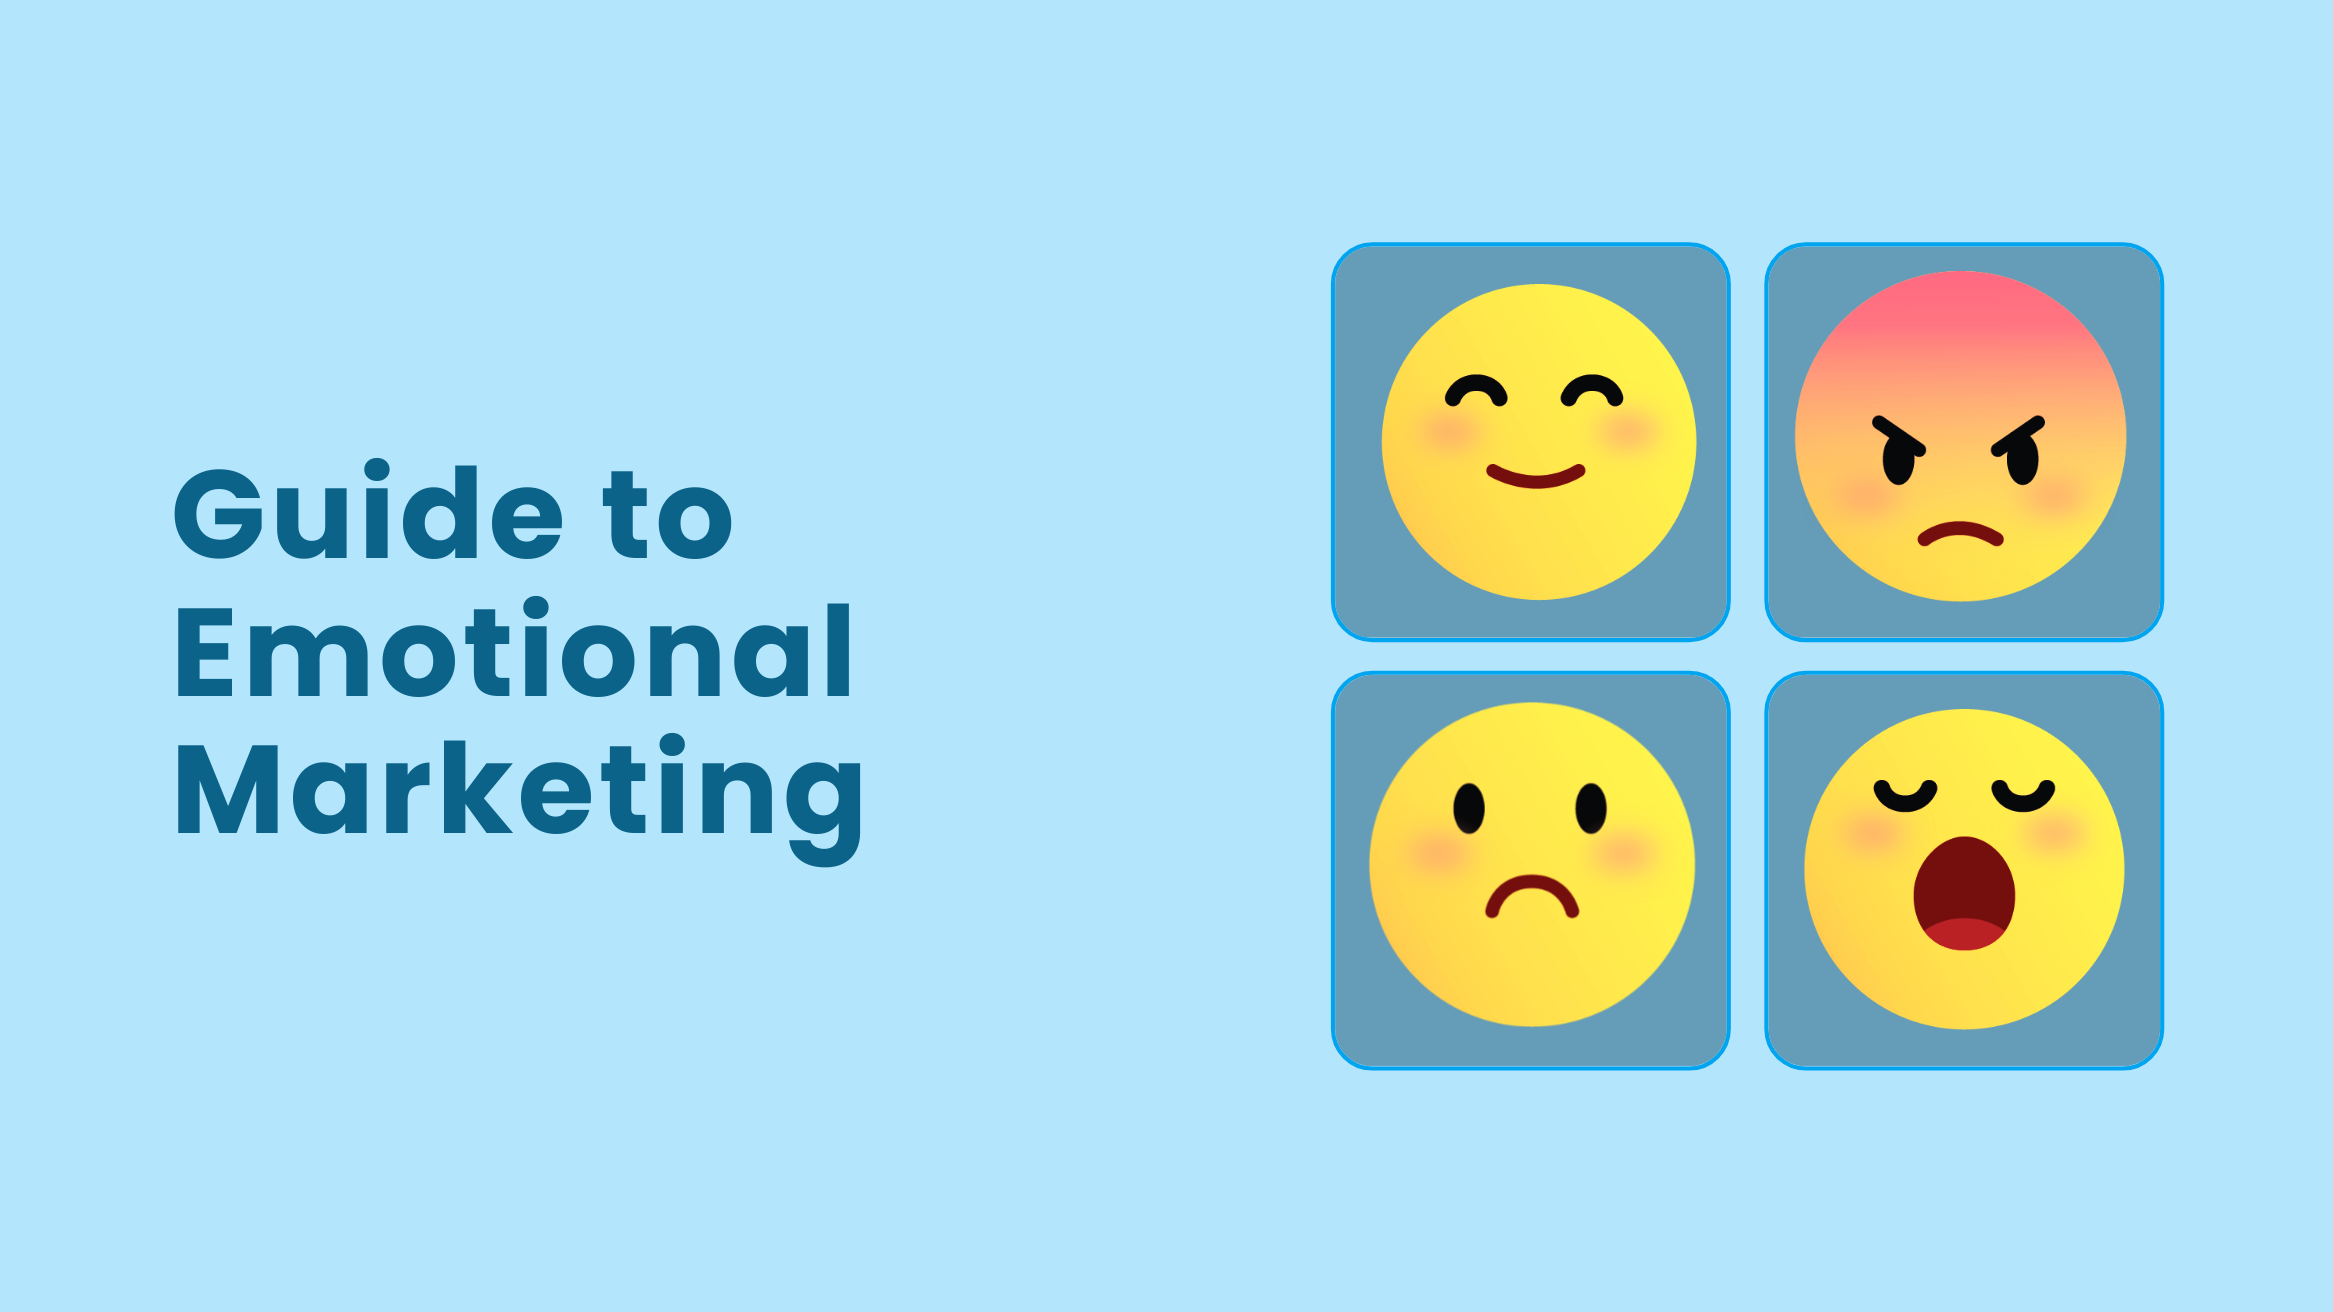 Guide to Emotional Marketing